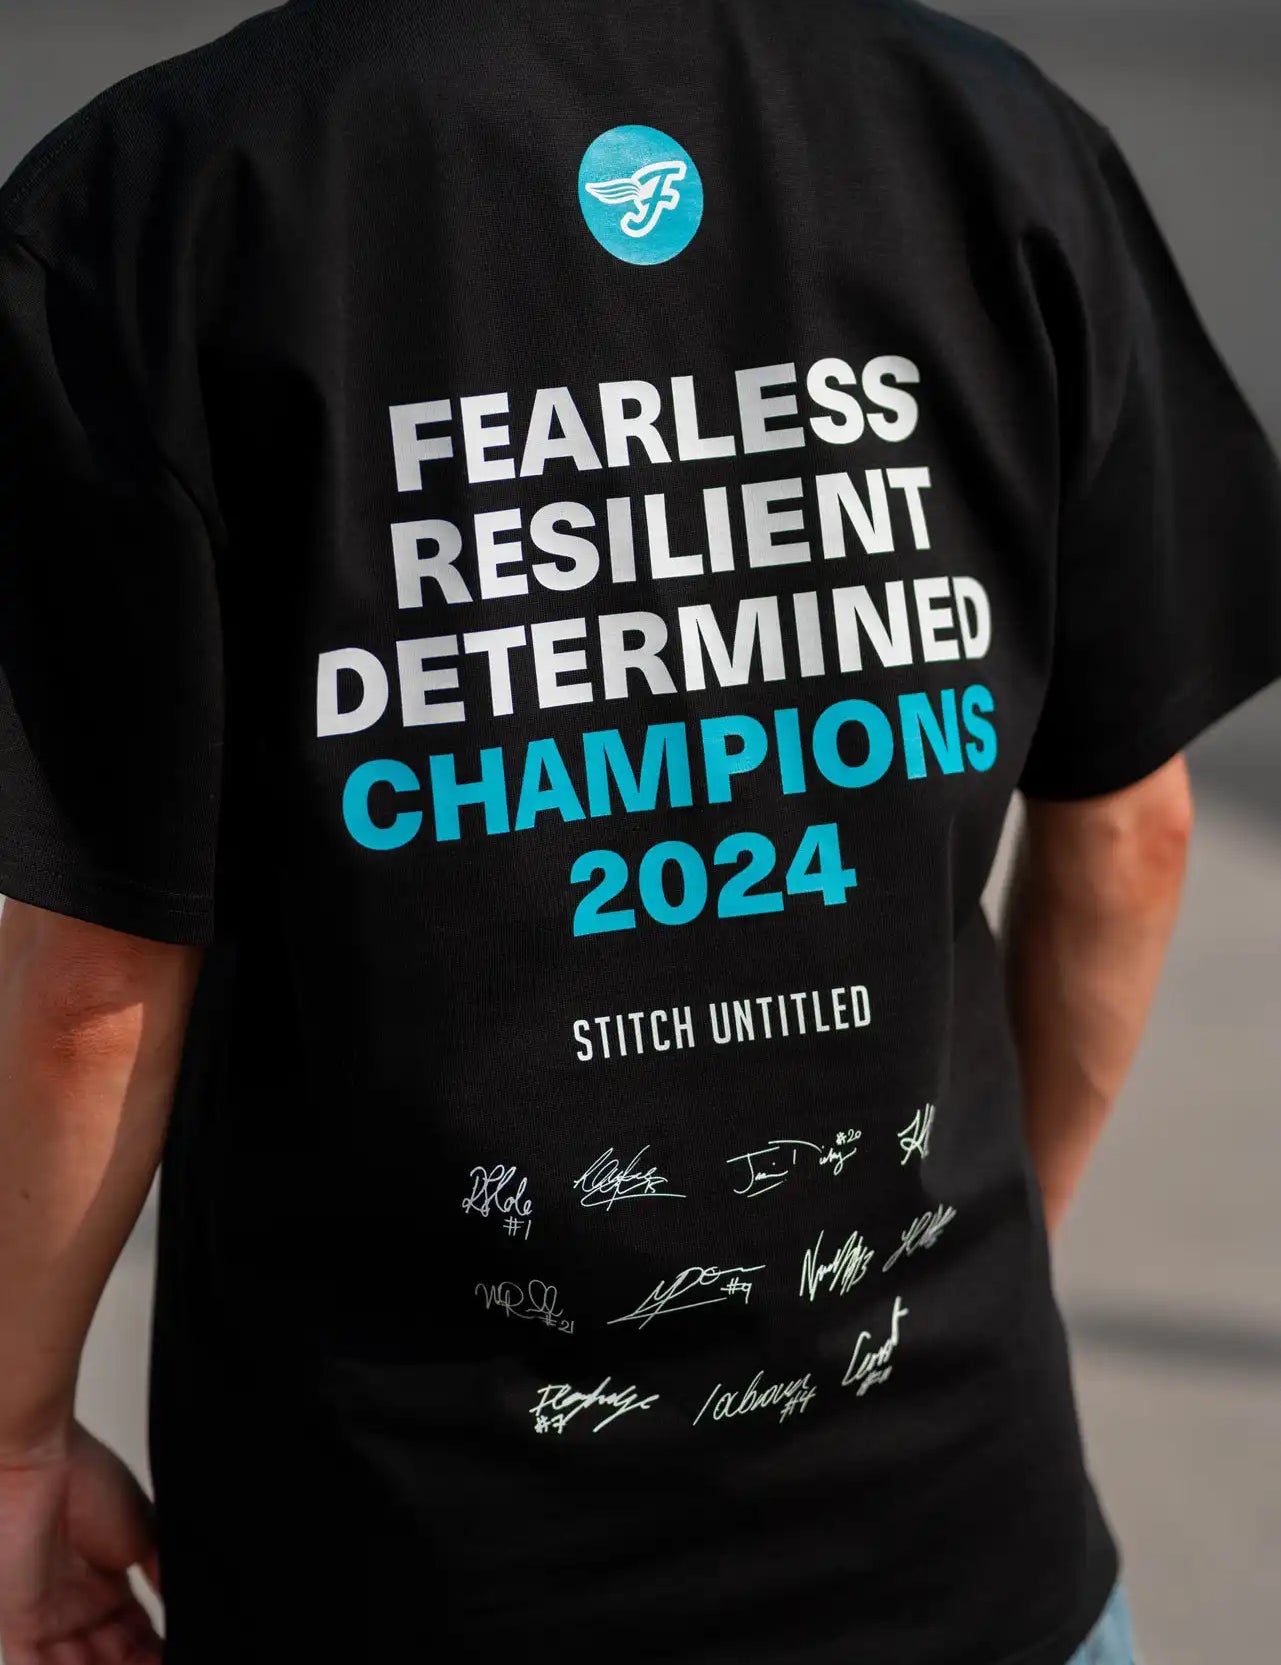 Person wearing a Stitch Untitled and Southside Flyers collaborative Champions Tee